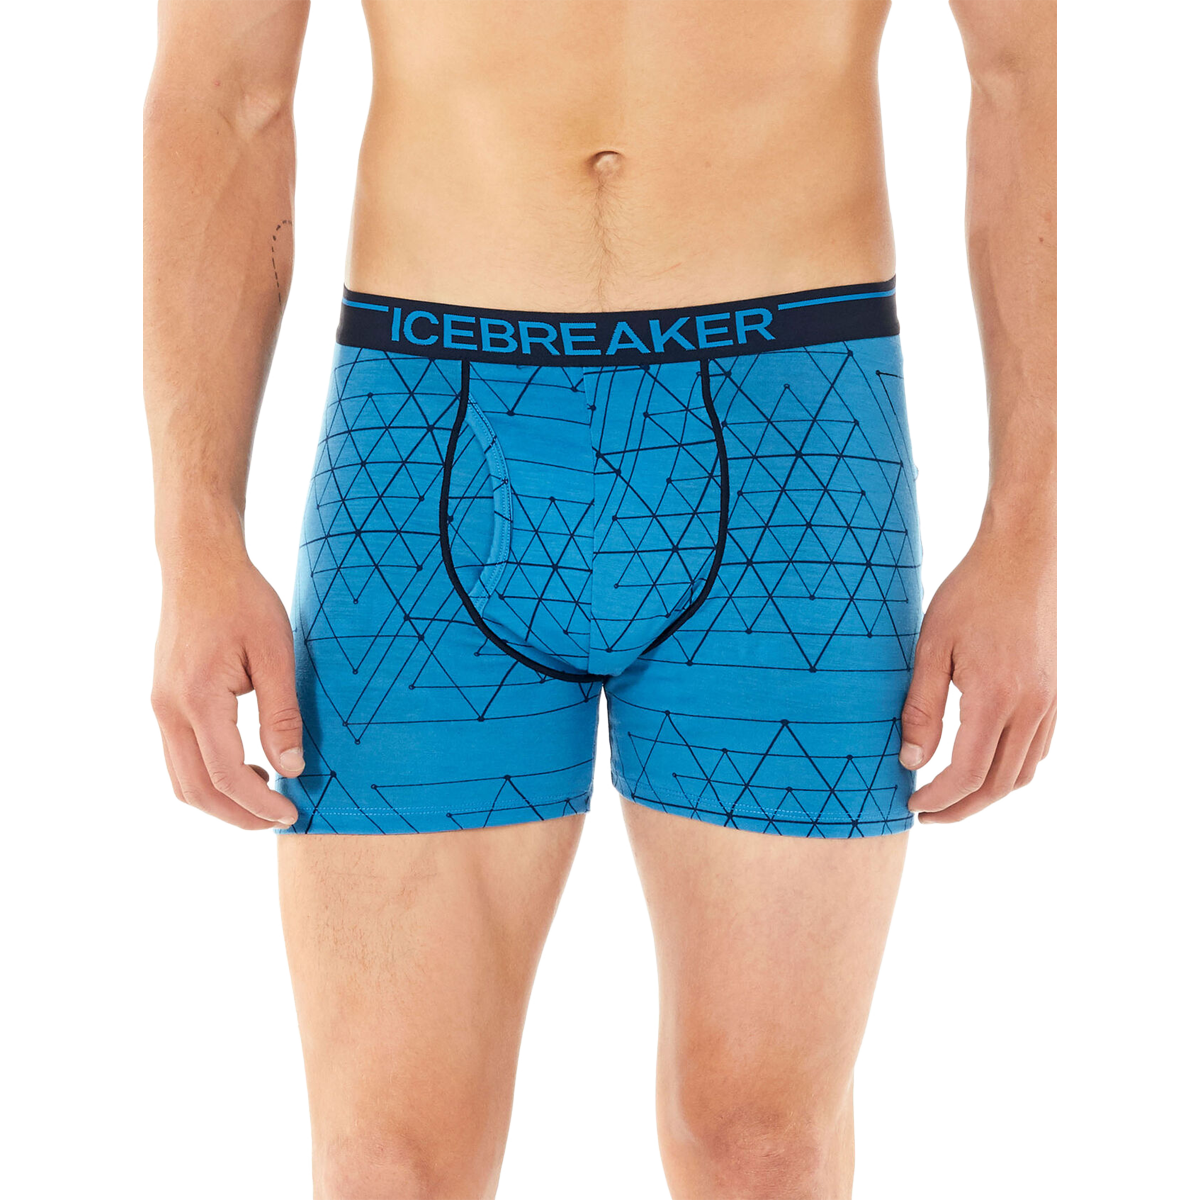 Men's Anatomica Boxers w/ Fly alternate view